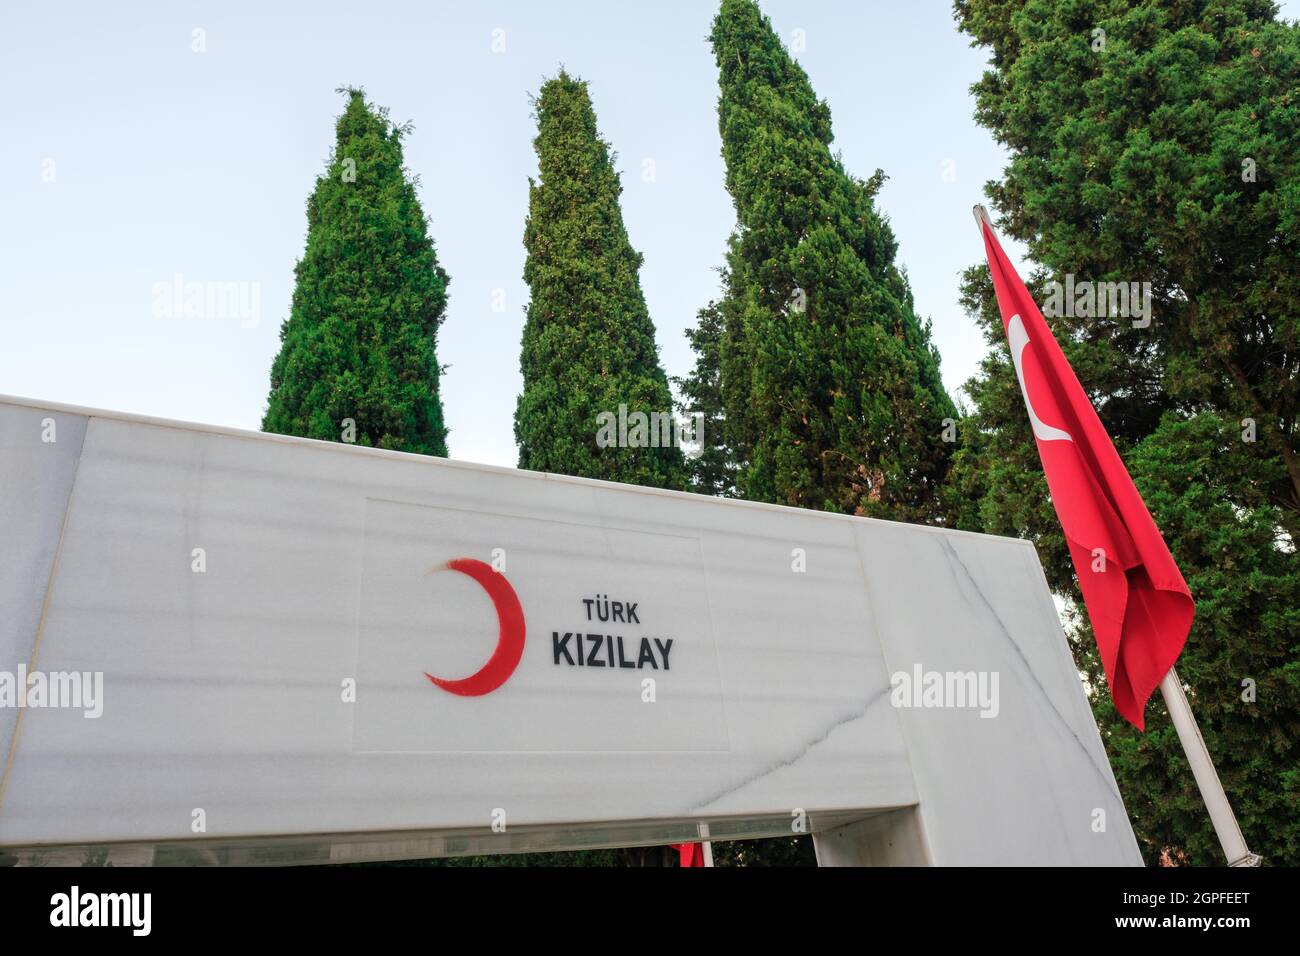 Beyoglu, Istanbul, Turkey - 06.27.2021: logo of Turkish Red Crescent (Turk Kizilay) on marble near Turkish flag and a lot of trees under blue sky from Stock Photo